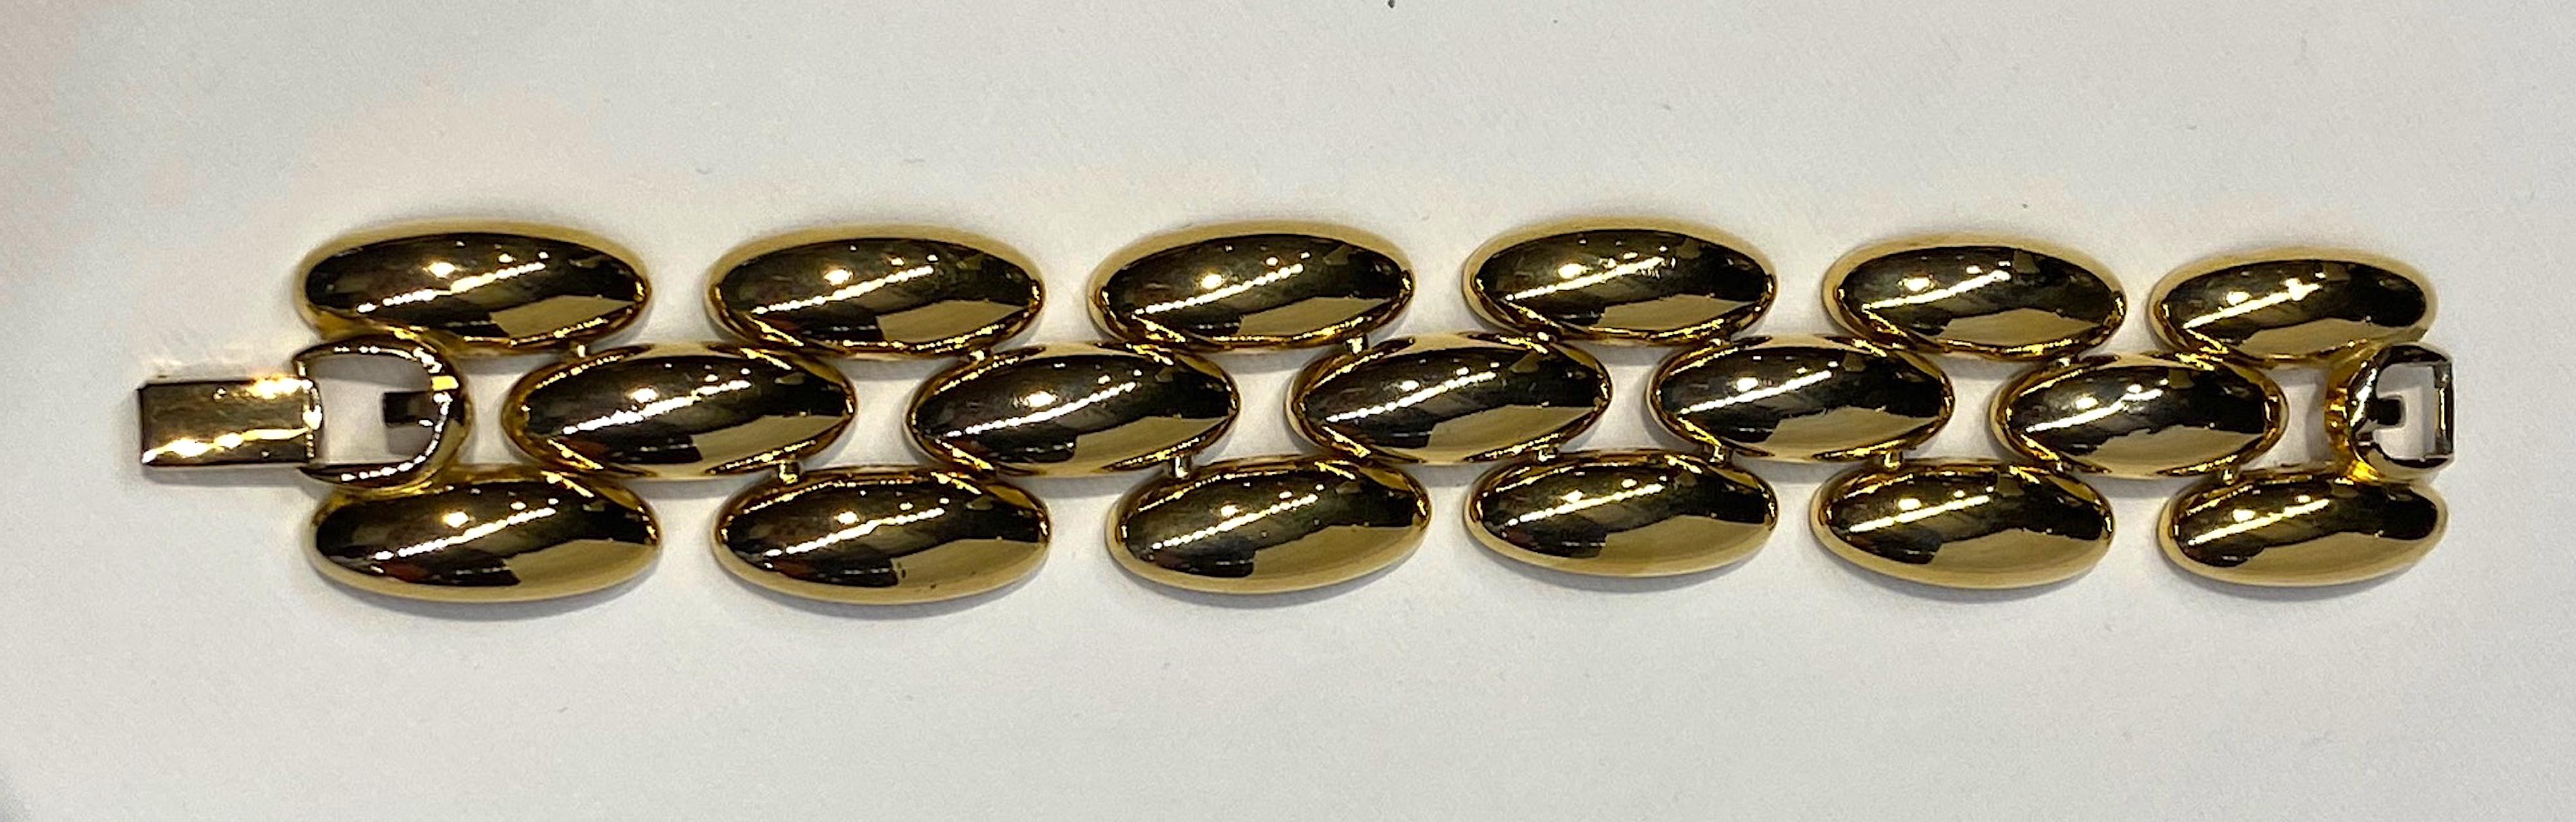 A classic wide oval link 1980s bracelet by French fashion house Givenchy. The bracelet measures 1.13 inches wide and 7.25 inches long with a wearable length of 7 inches. There are six double oval links connected by the middle 6 single oval links.